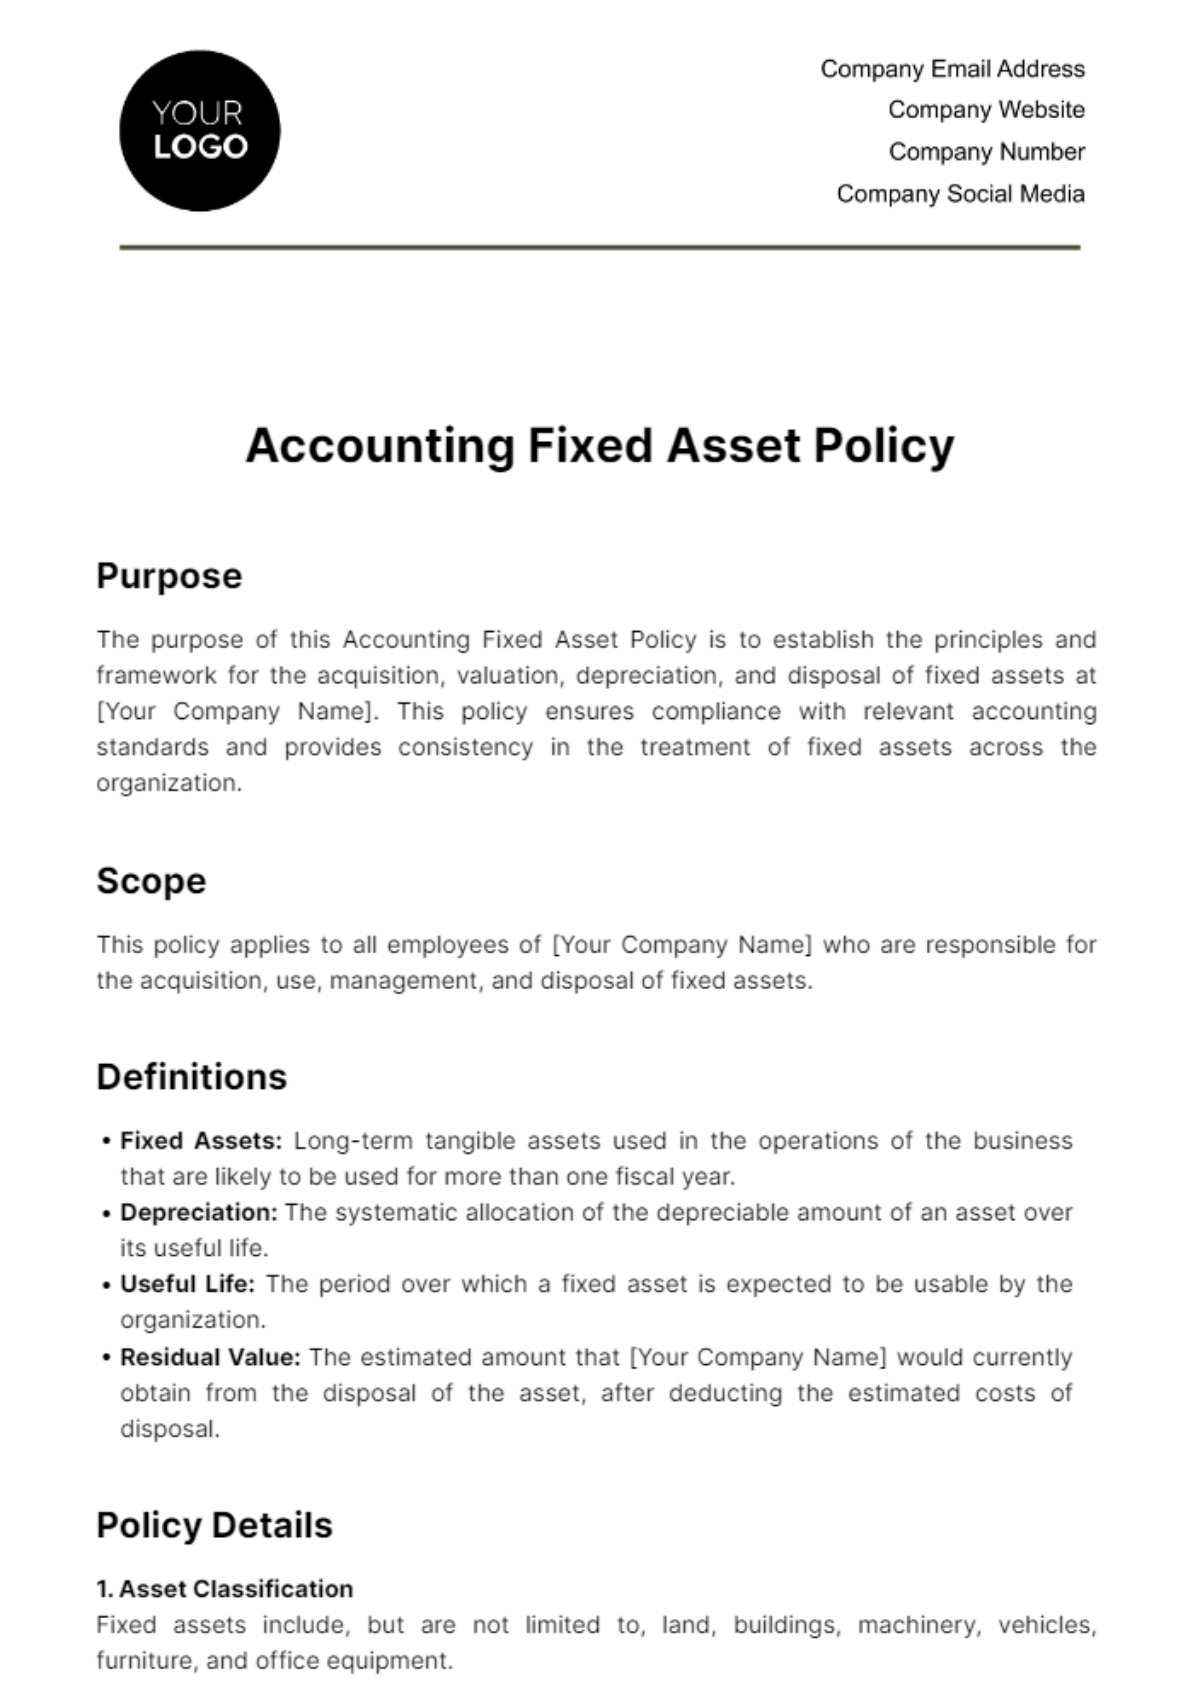 Accounting Fixed Asset Policy Template